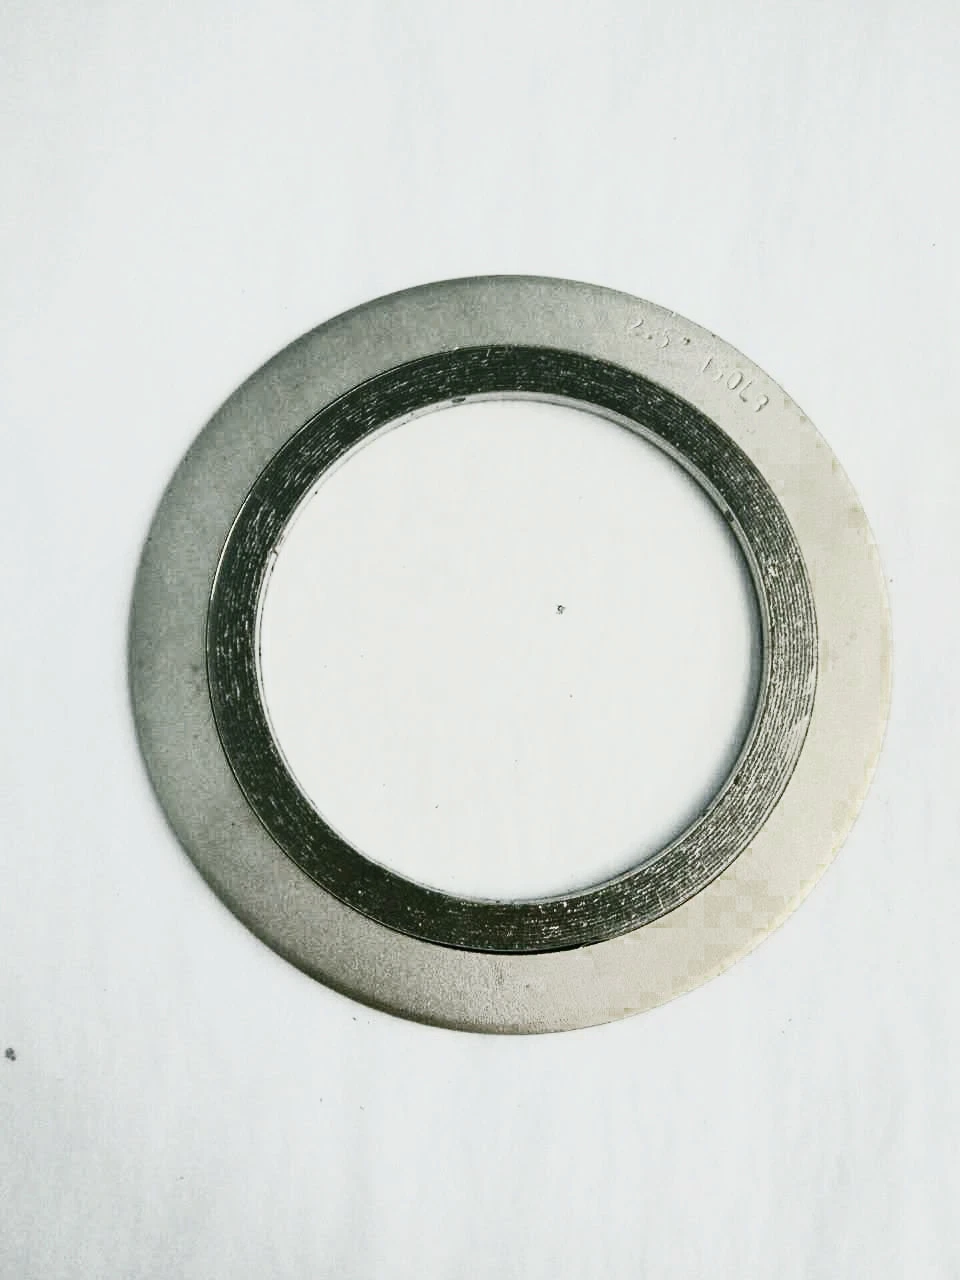 Spiral Wound Gasket - PTFE with Metal